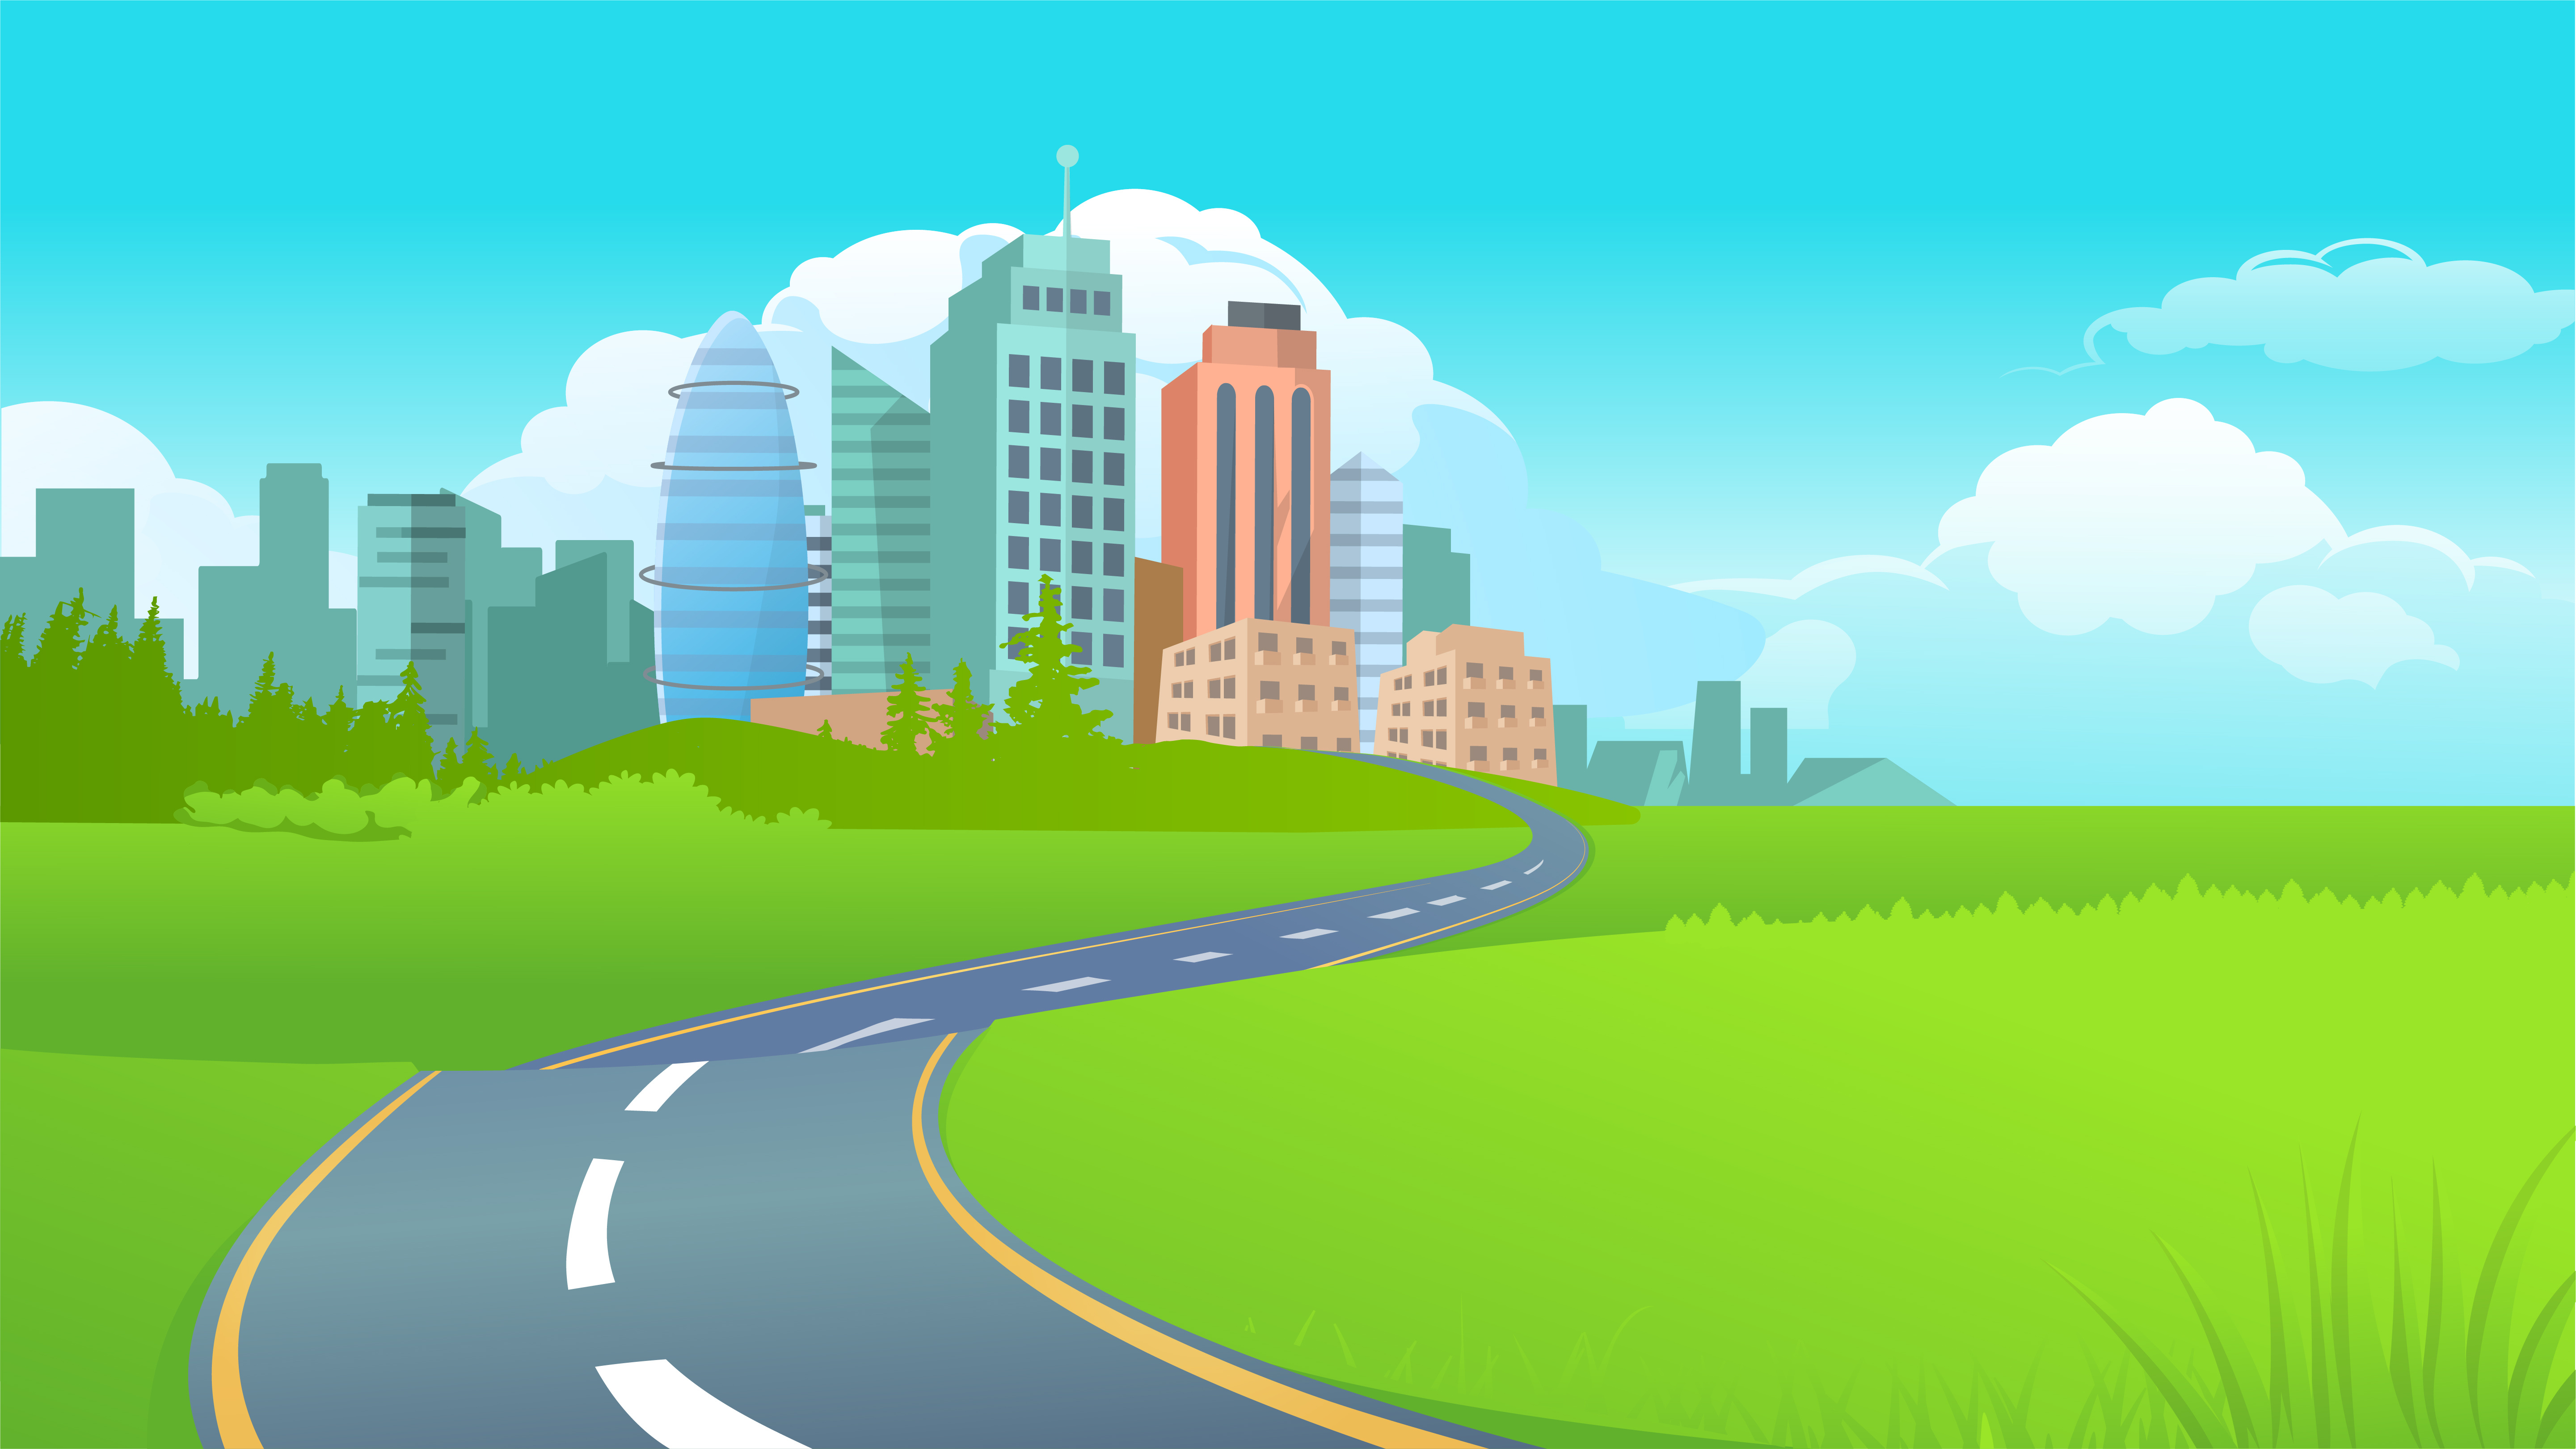 Cartoon Road Background by Cartoons.co on Dribbble